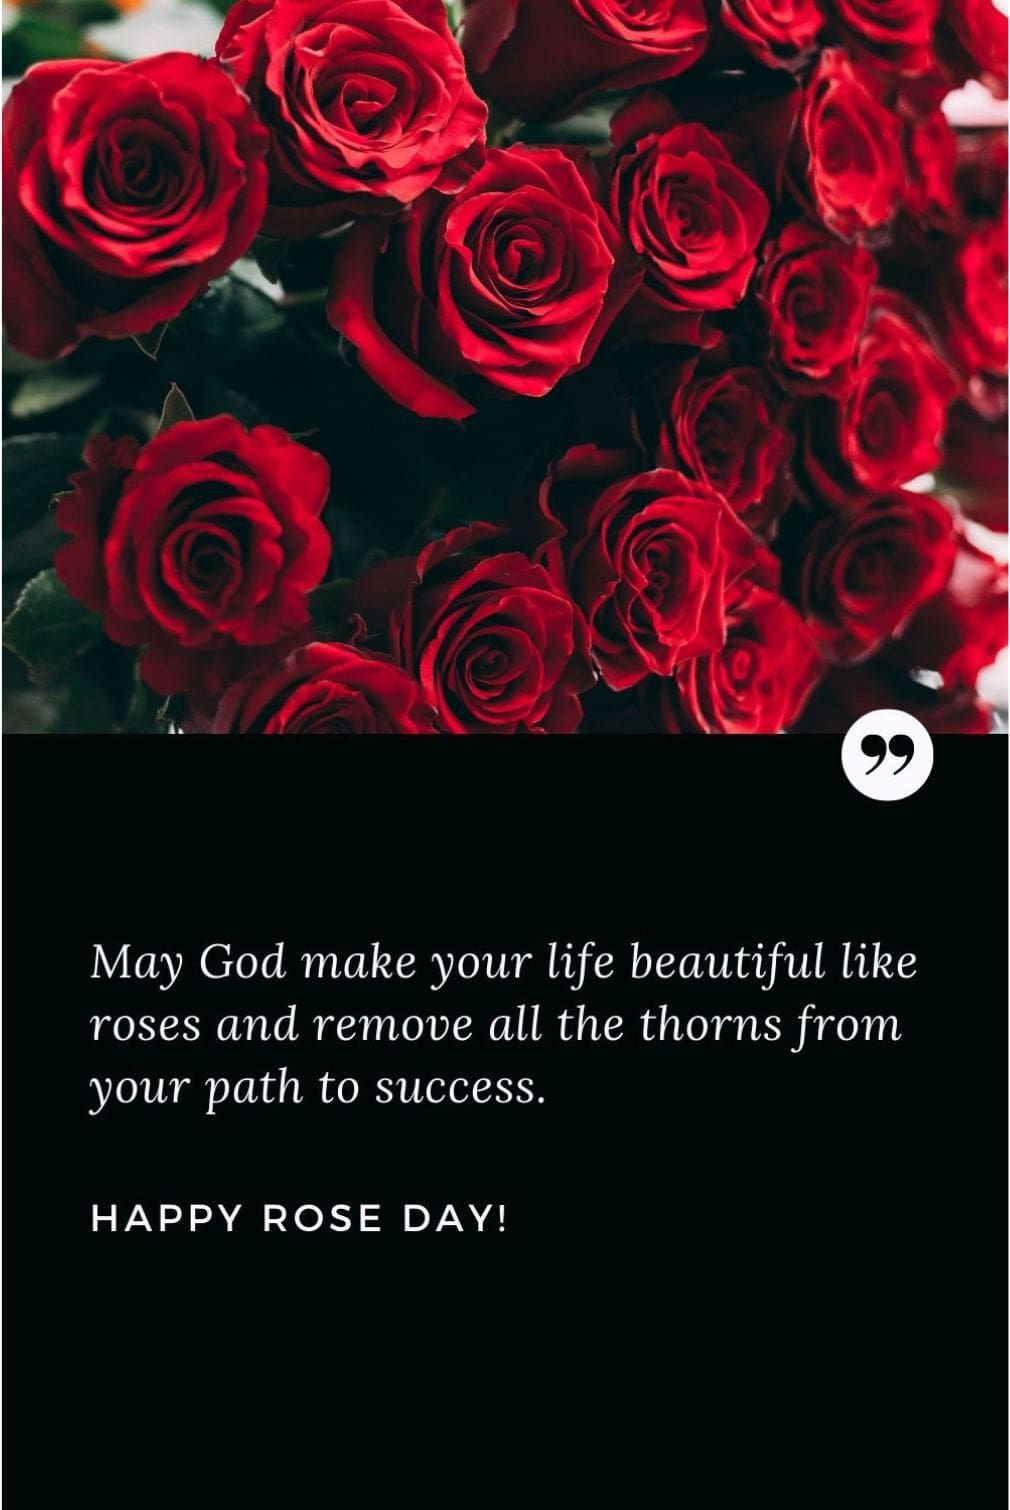 when happy rose day